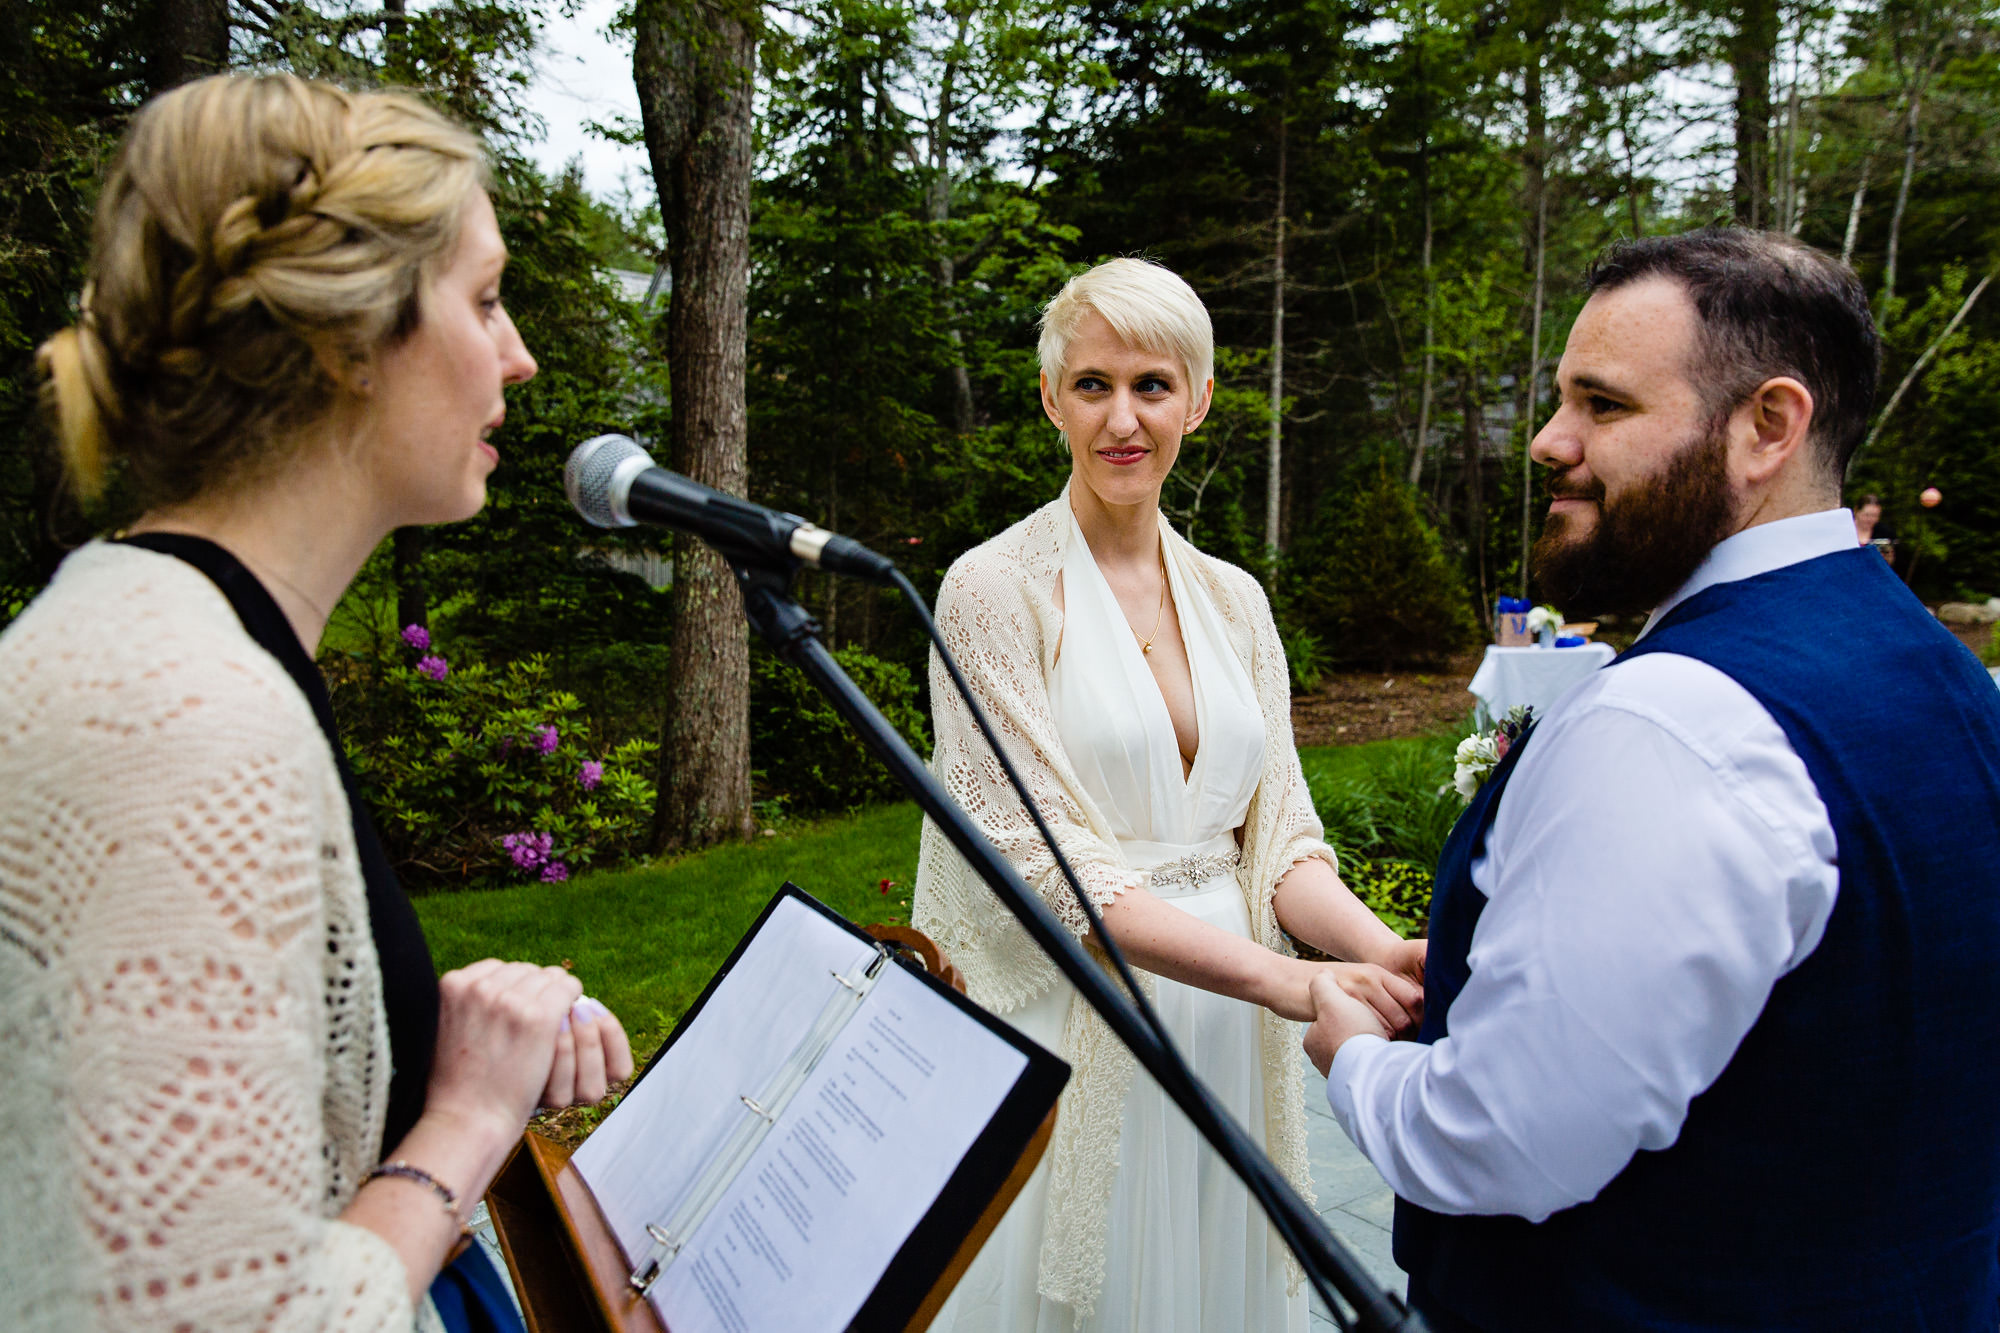 An oceanside wedding ceremony at a private residence in Hancock, Maine